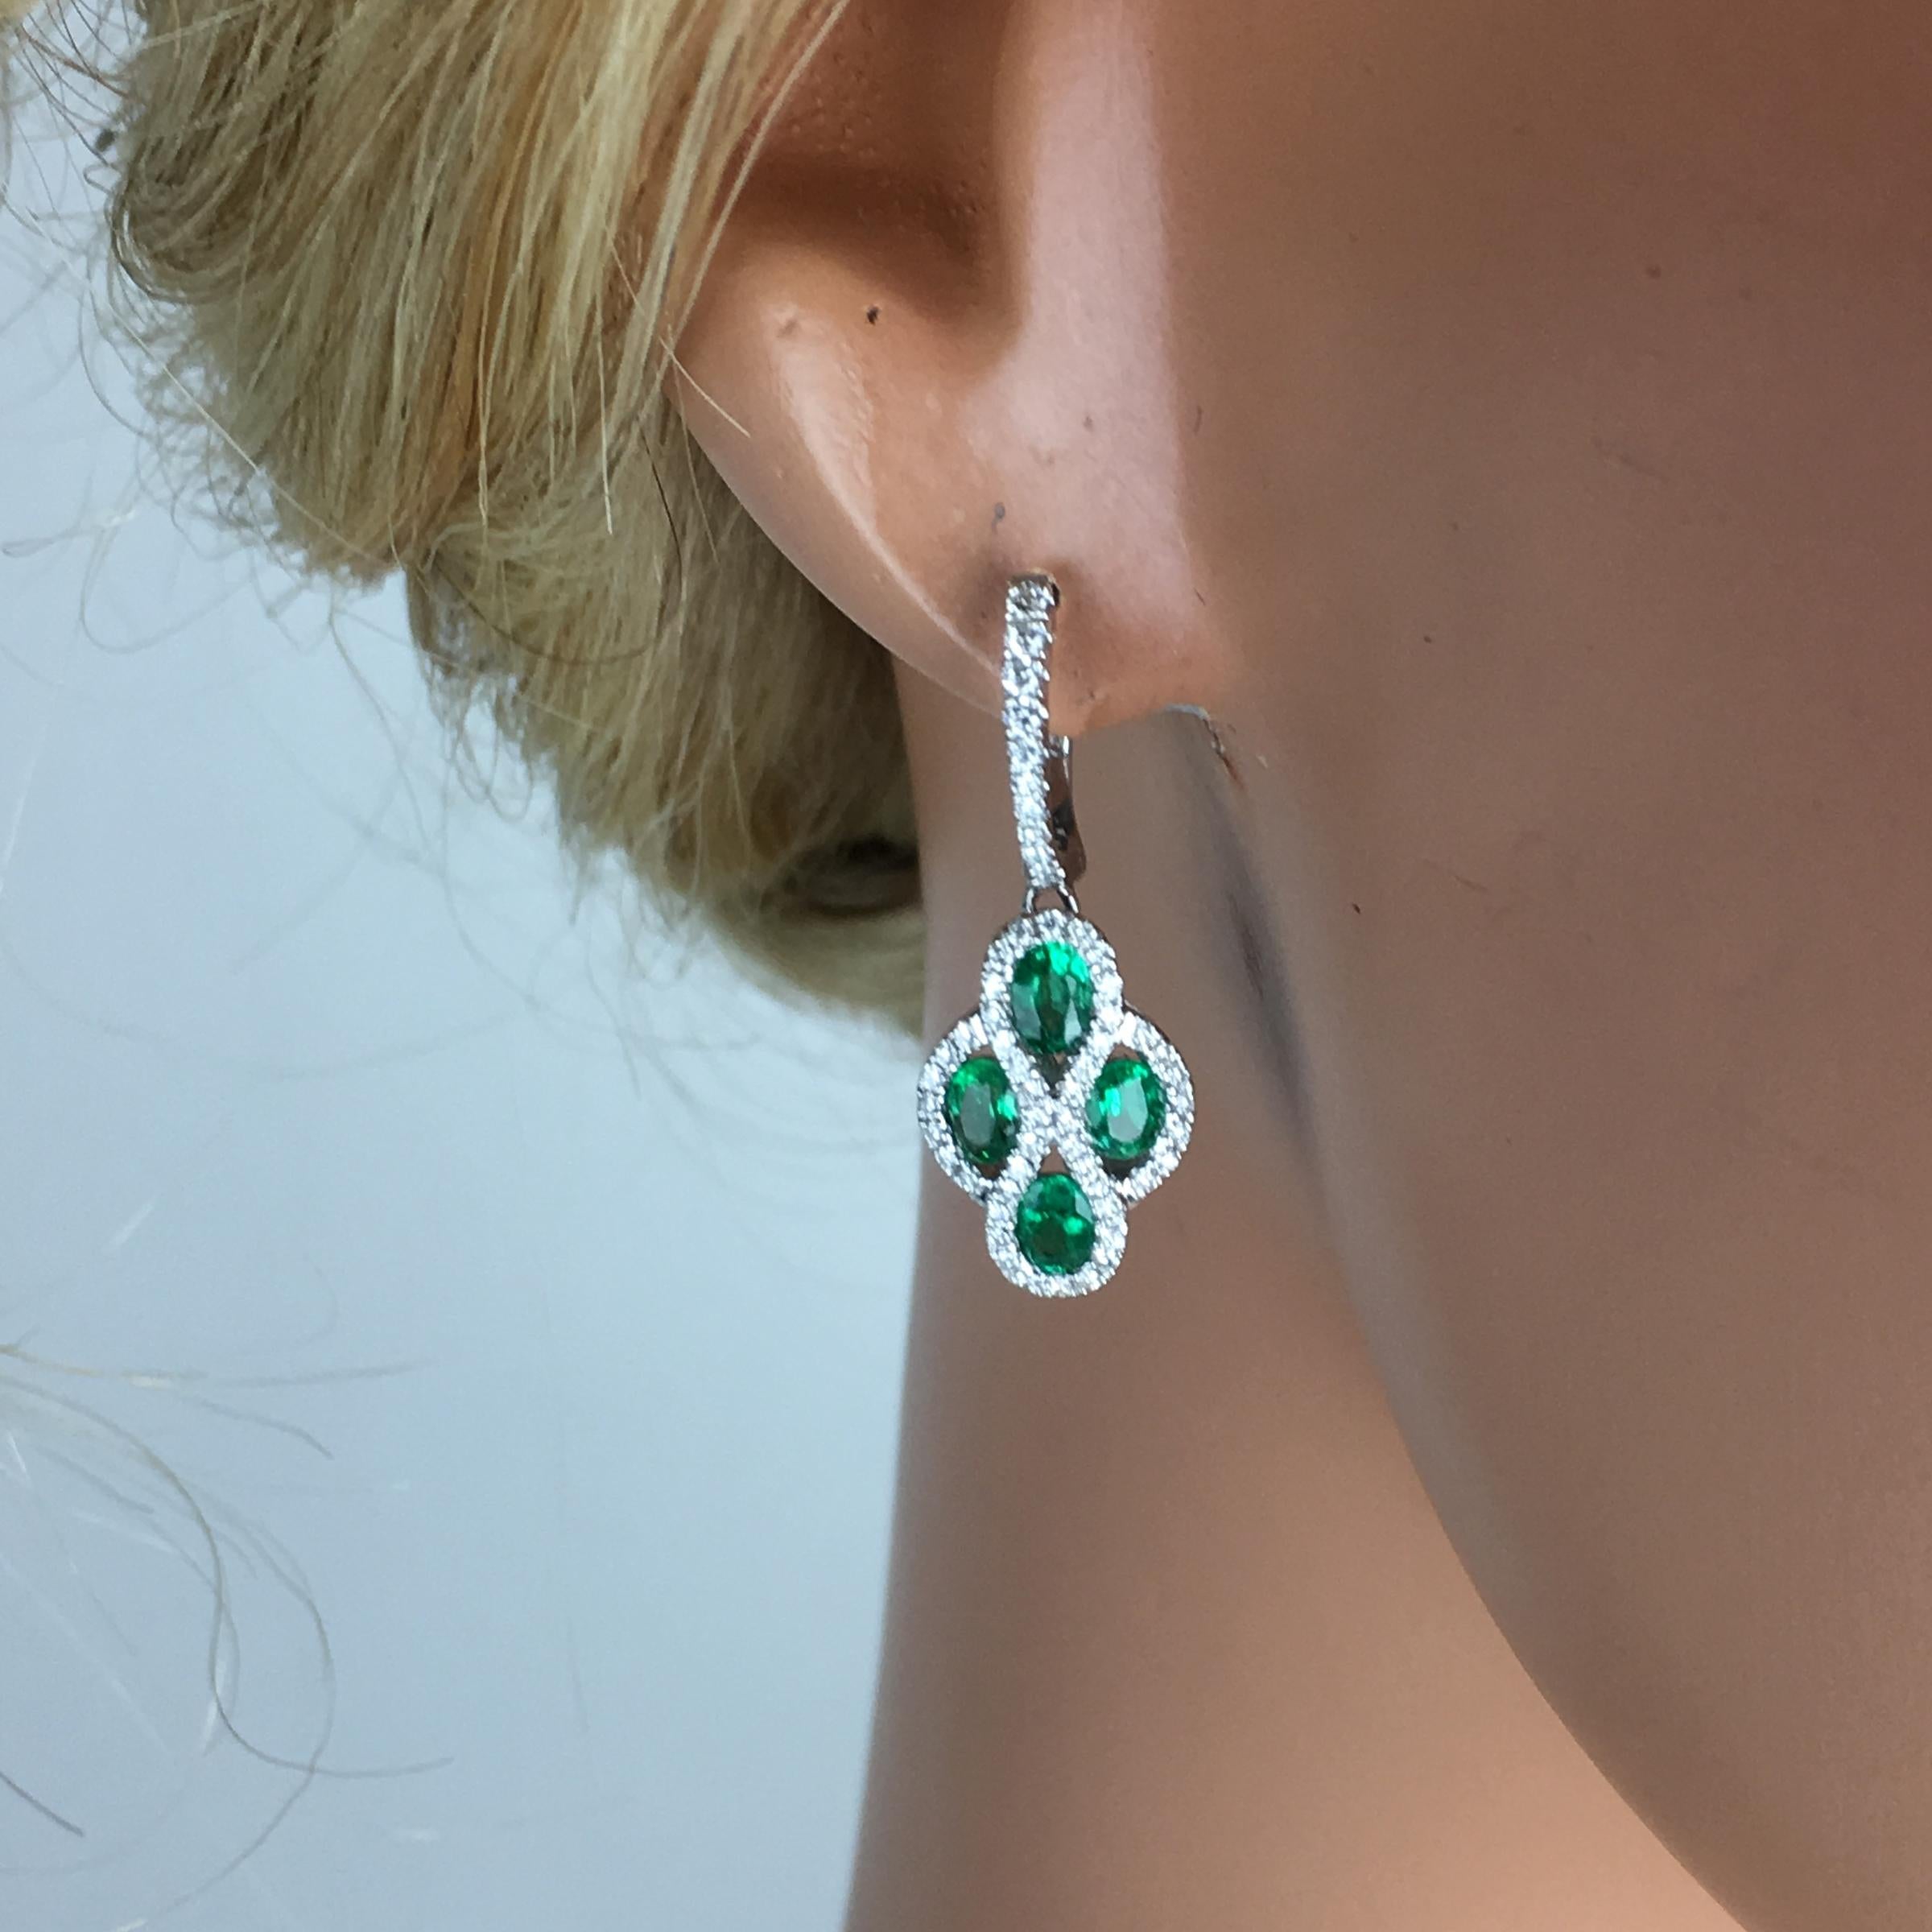 Contemporary 1.23 Carat Fine Emerald and Diamond Earrings in 18 Karat White Gold